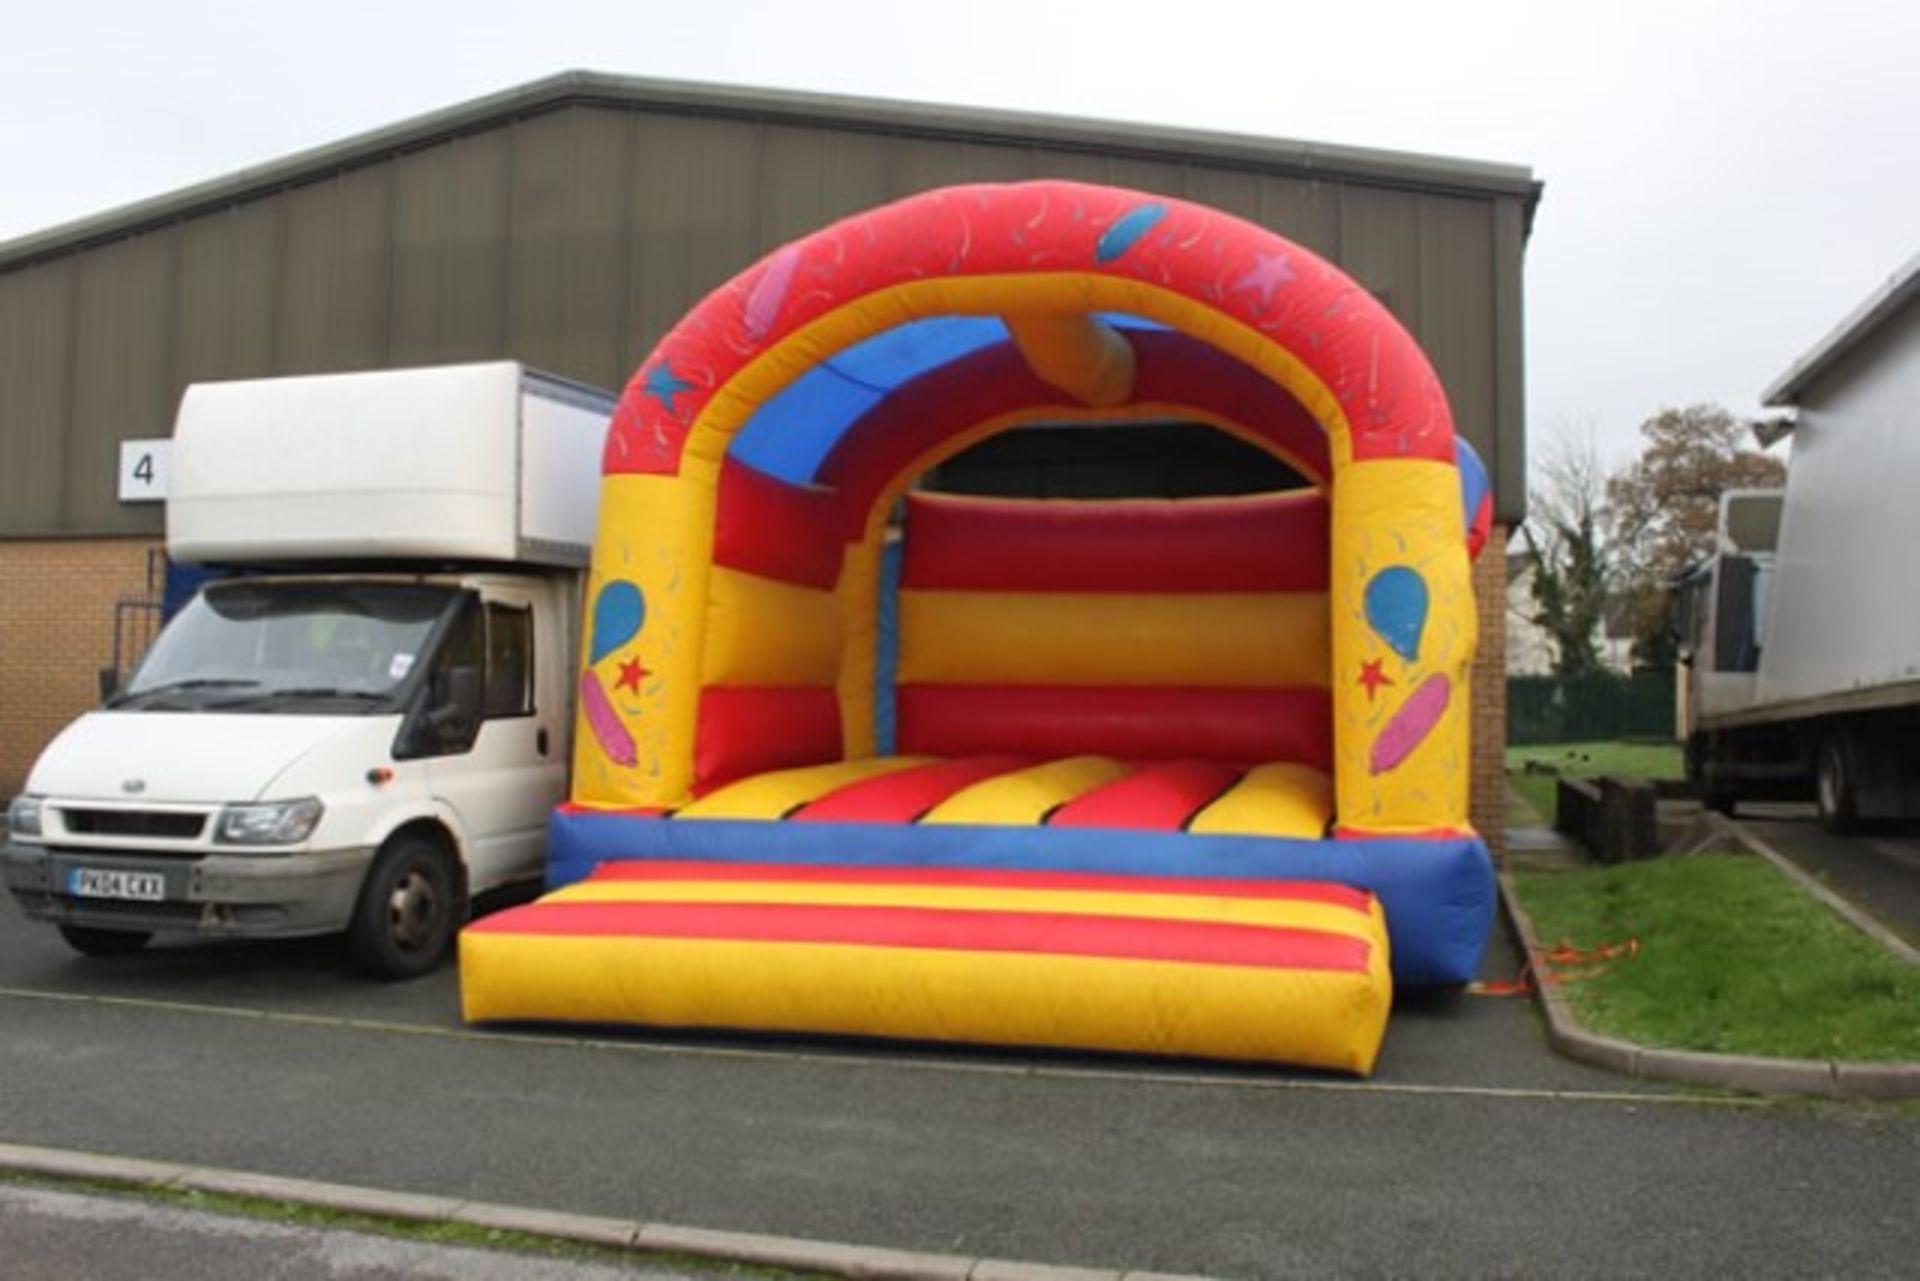 15ft x 12ft Inflatable Adult Bouncy Castle - Image 2 of 2